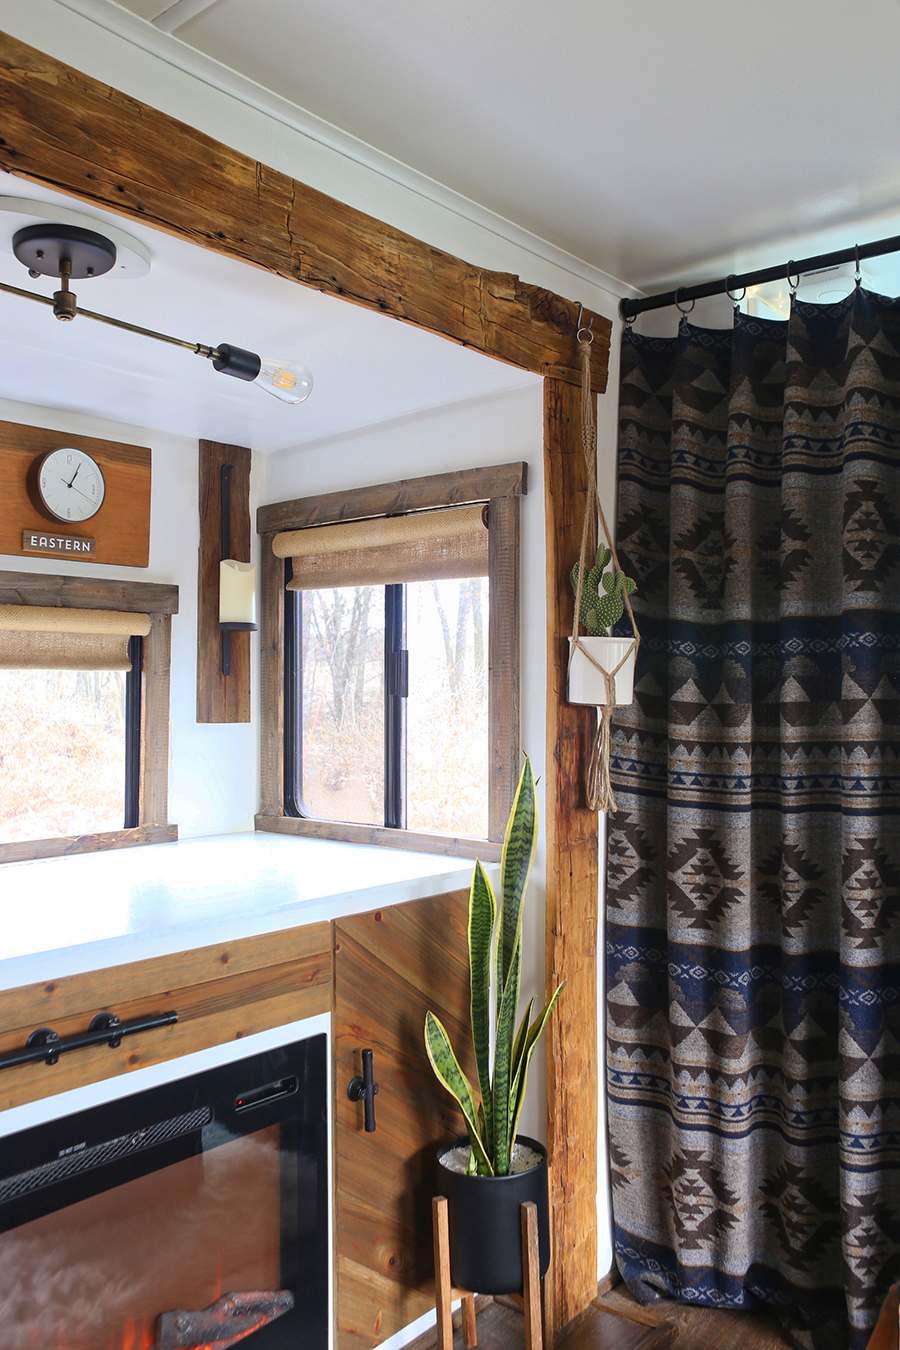 Why I Chose Camp Blankets for our RV Curtains